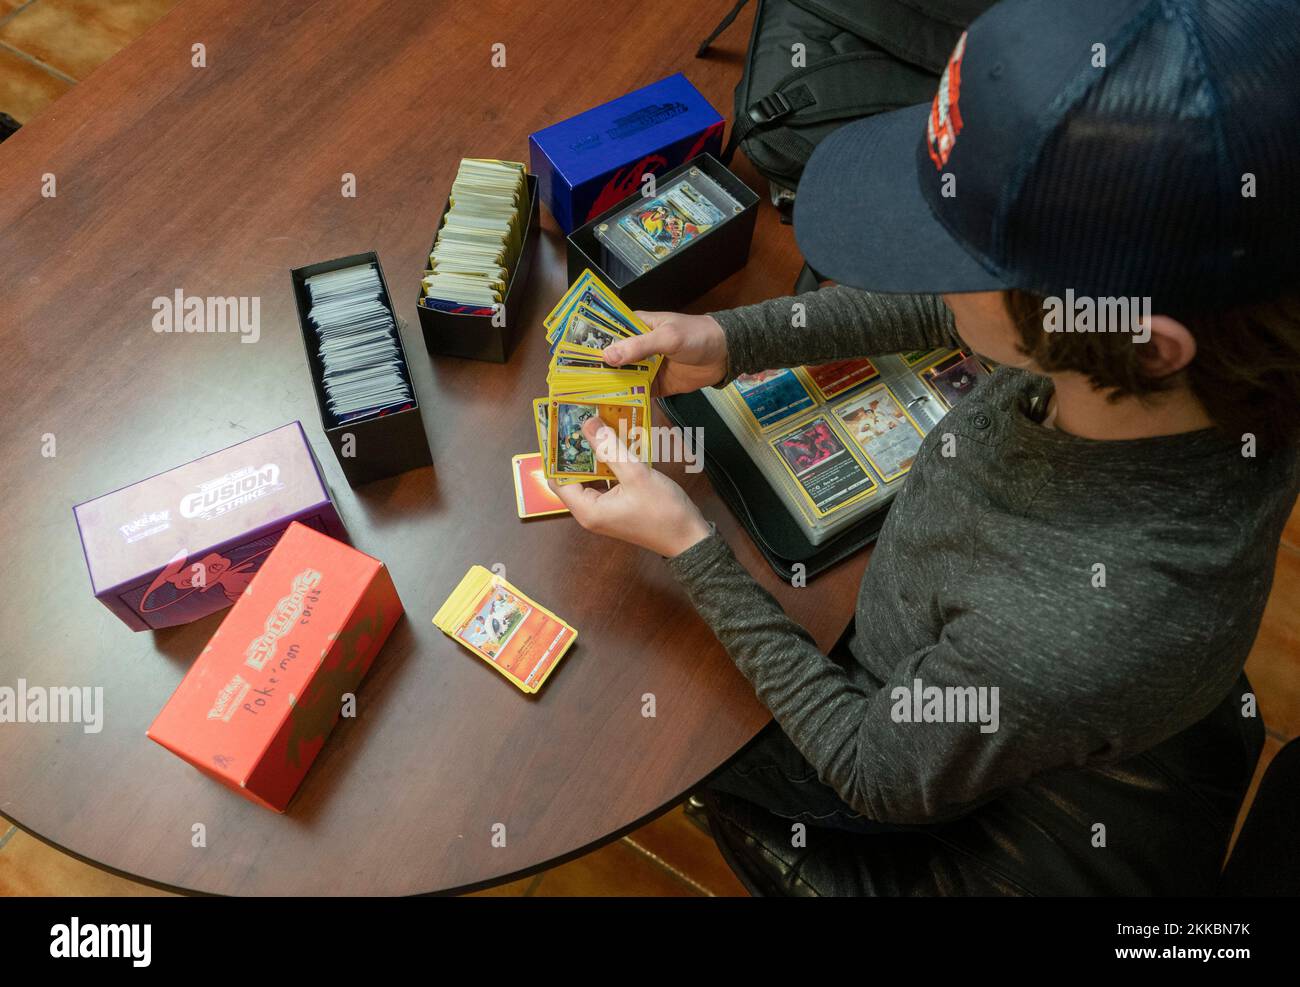 Austin Texas USA, November 24 2022: 14-year old boy sorts his Pokemon card collection during a lull in Thanksgiving dinner activities at a relative's home. ©Bob Daemmrich Stock Photo